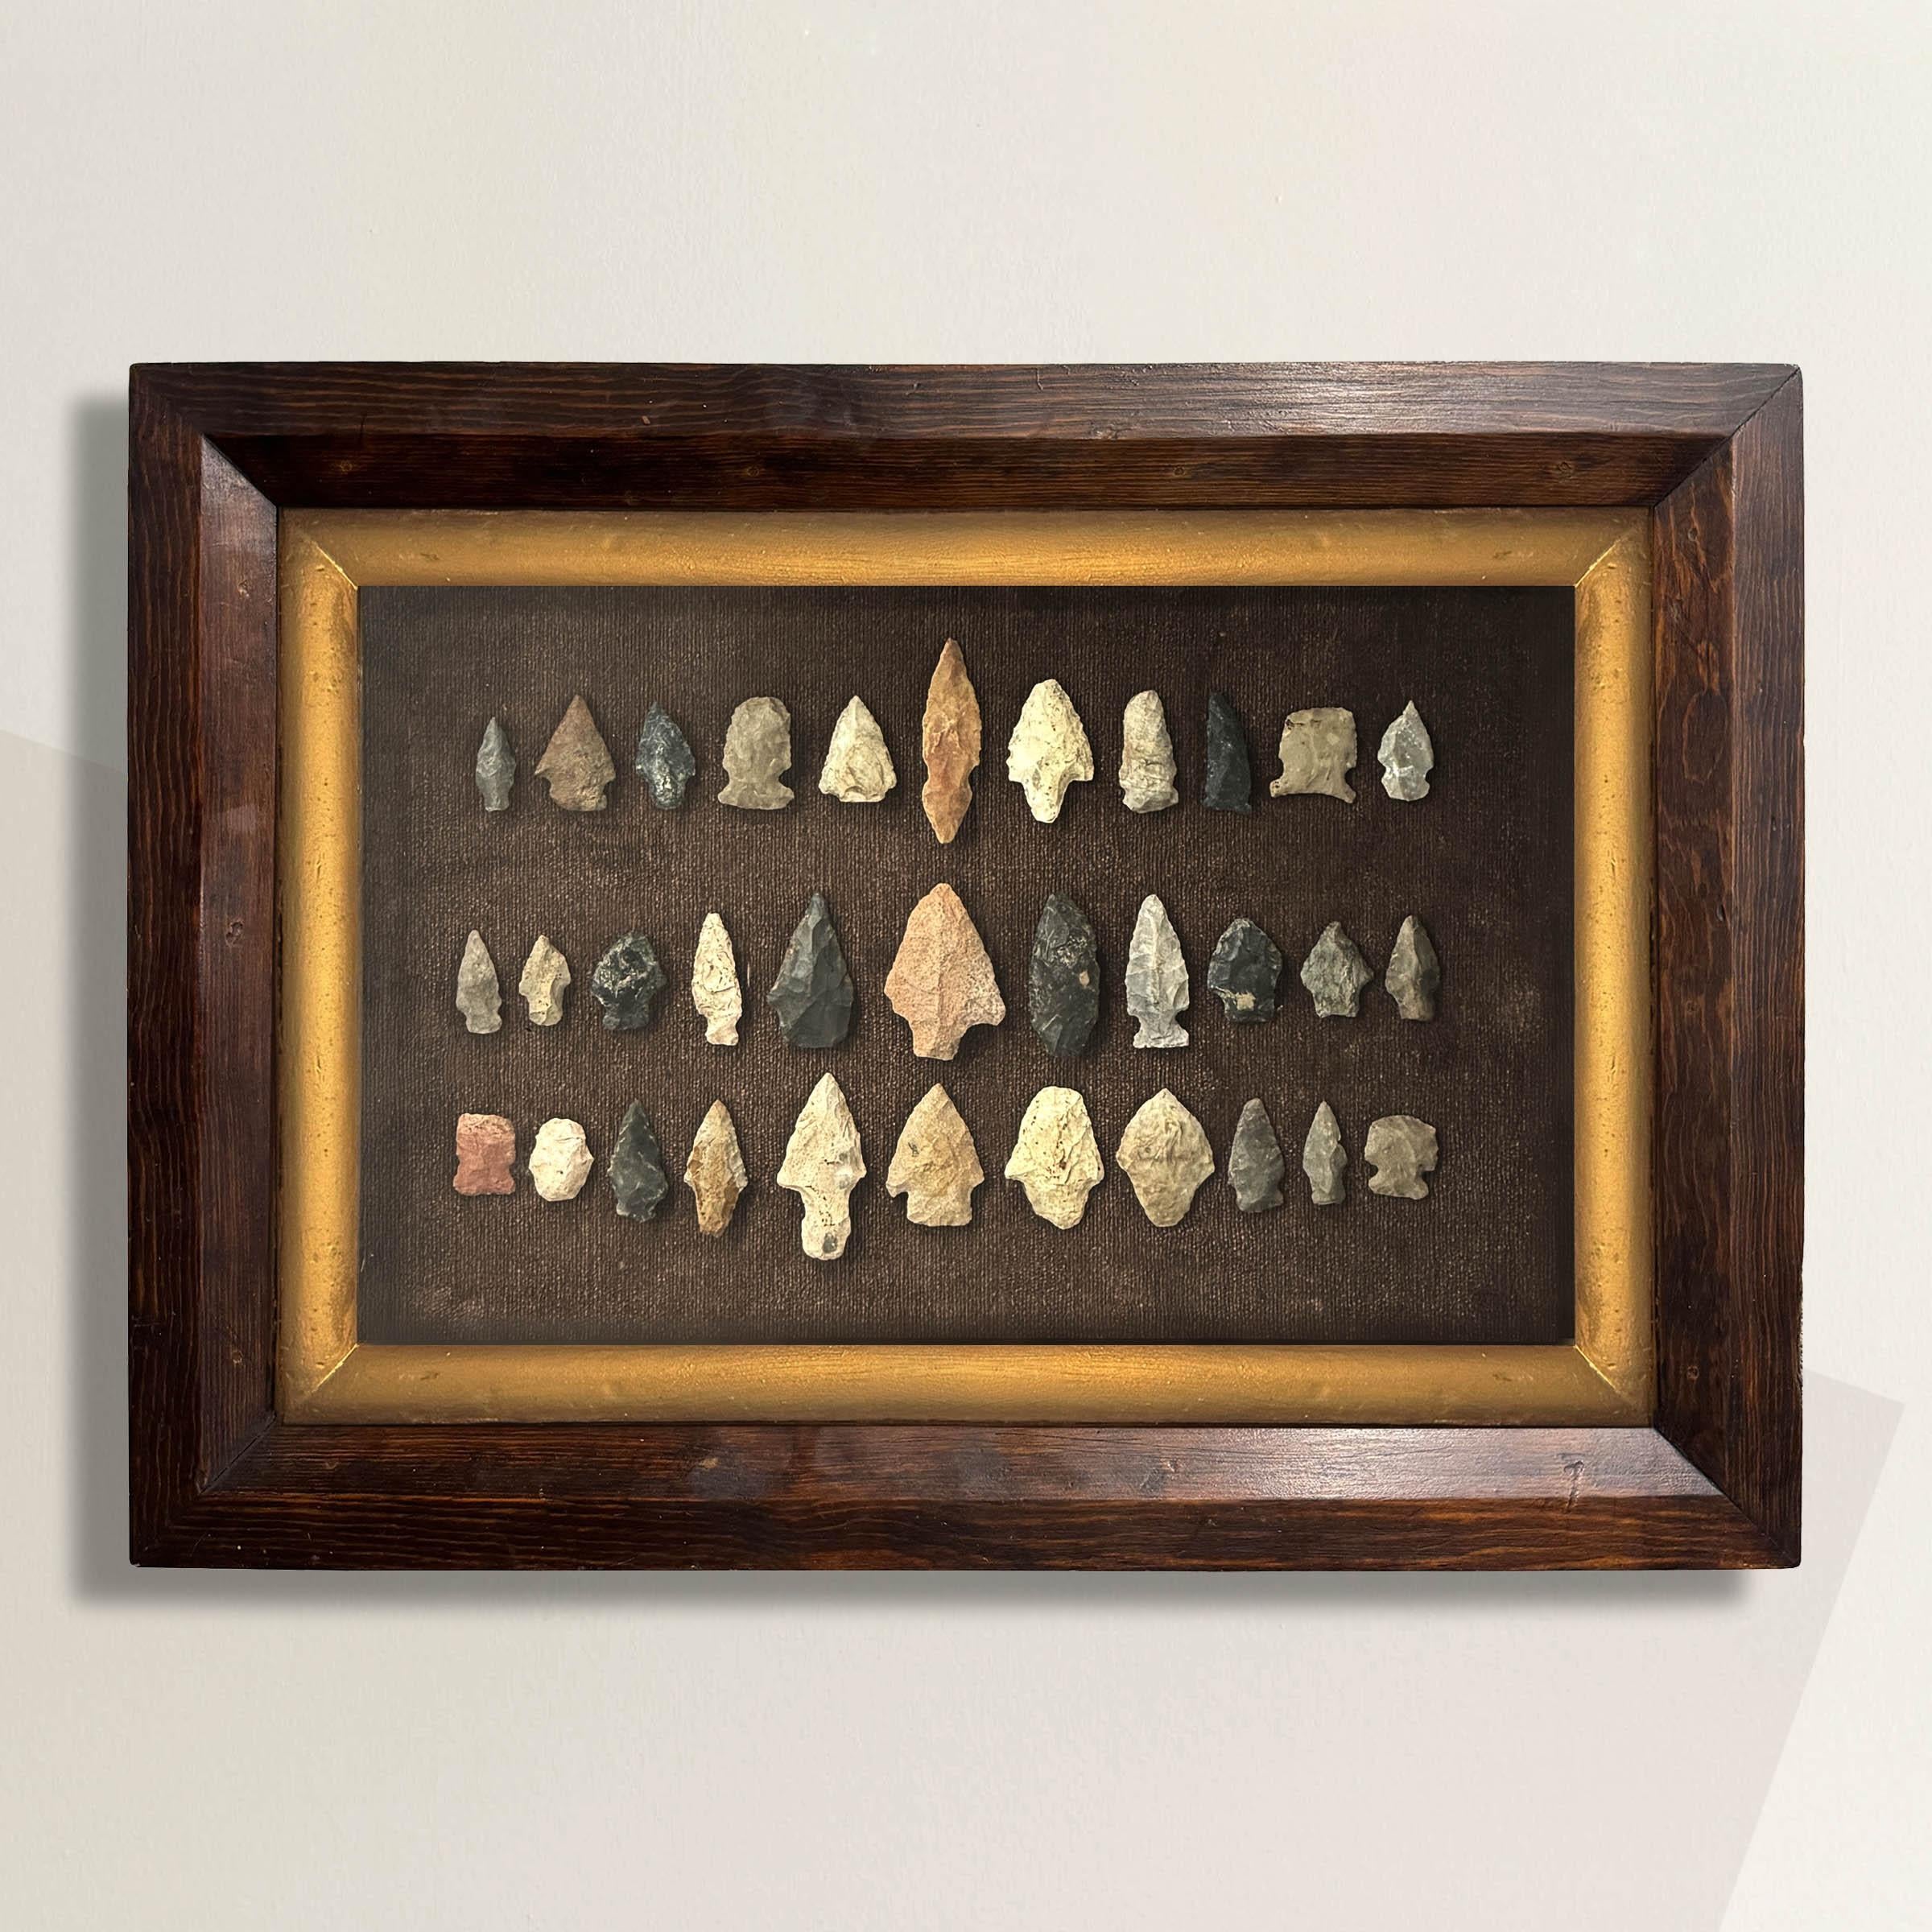 This collection of 33 Native American arrowheads found in Wisconsin's Waukesha County offers a glimpse into the rich indigenous history of the region. Framed in a 19th-century frame with a gold fillet, these artifacts showcase the craftsmanship and